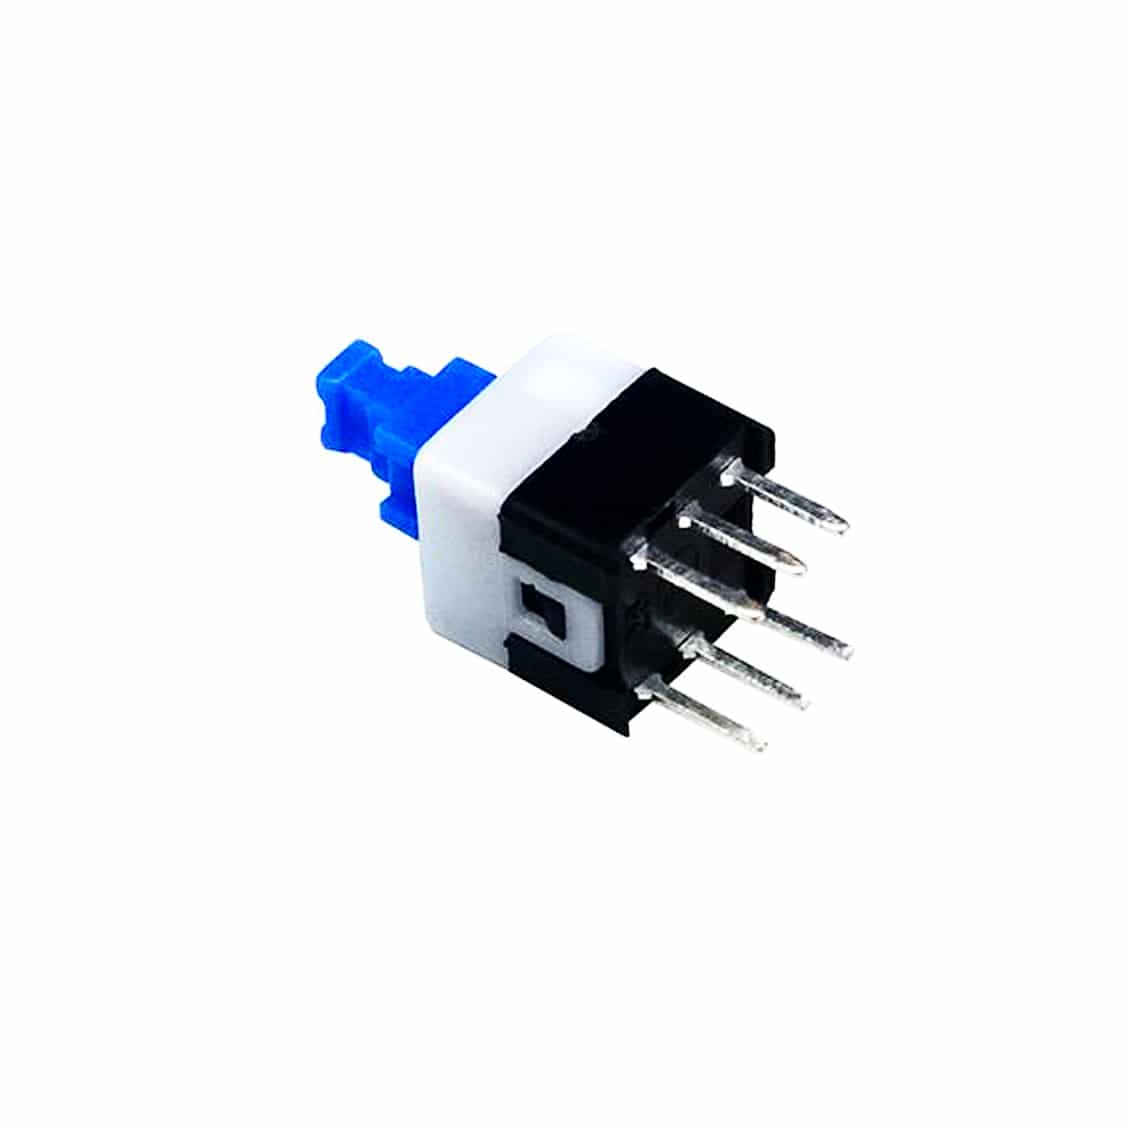 6 Pin Square DPDT 7MM x 7MM Self Locking Switch – Pack of 10 2